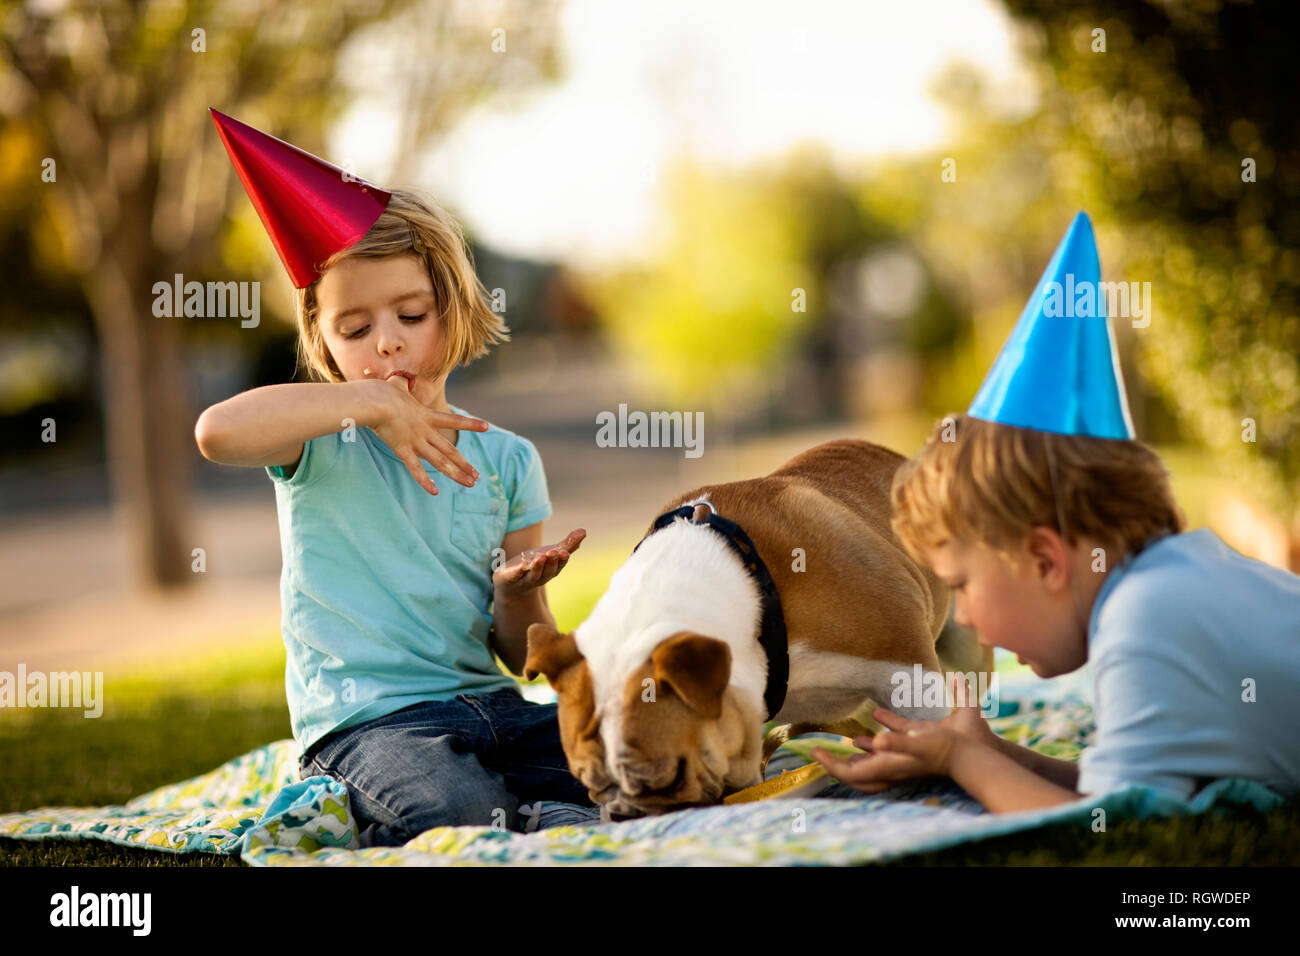 Bulldog eating birthday cake off a plate, with horrified young boy looking on. Stock Photo